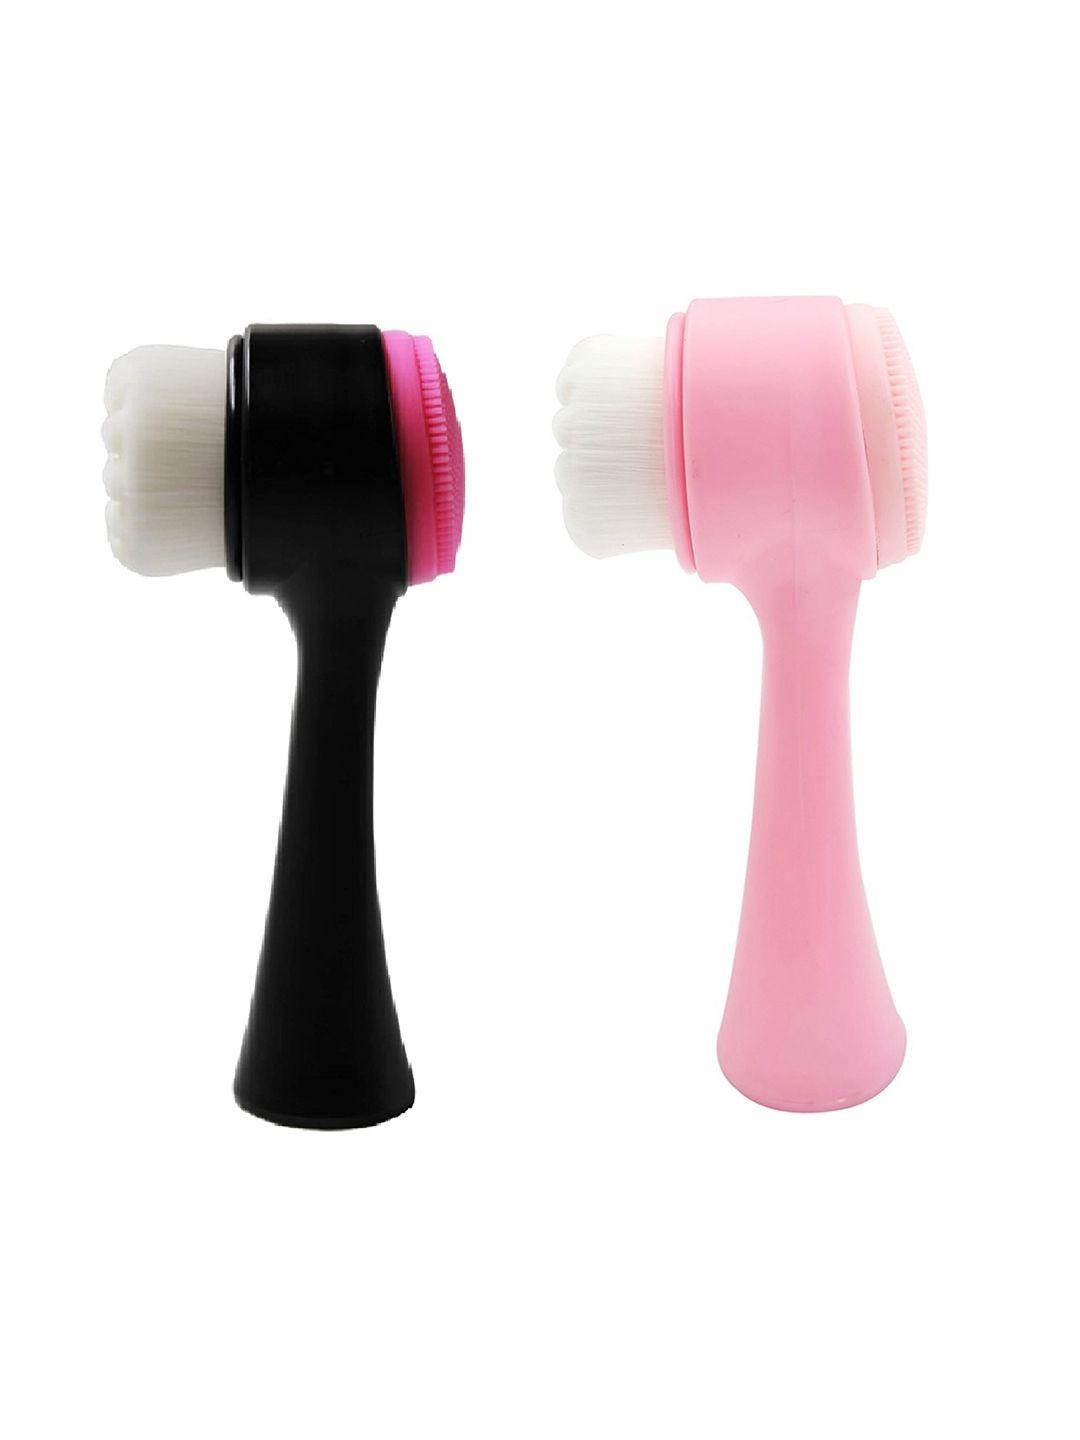 majestique-set-of-2-pink-&-blue-facial-cleansing-brushes